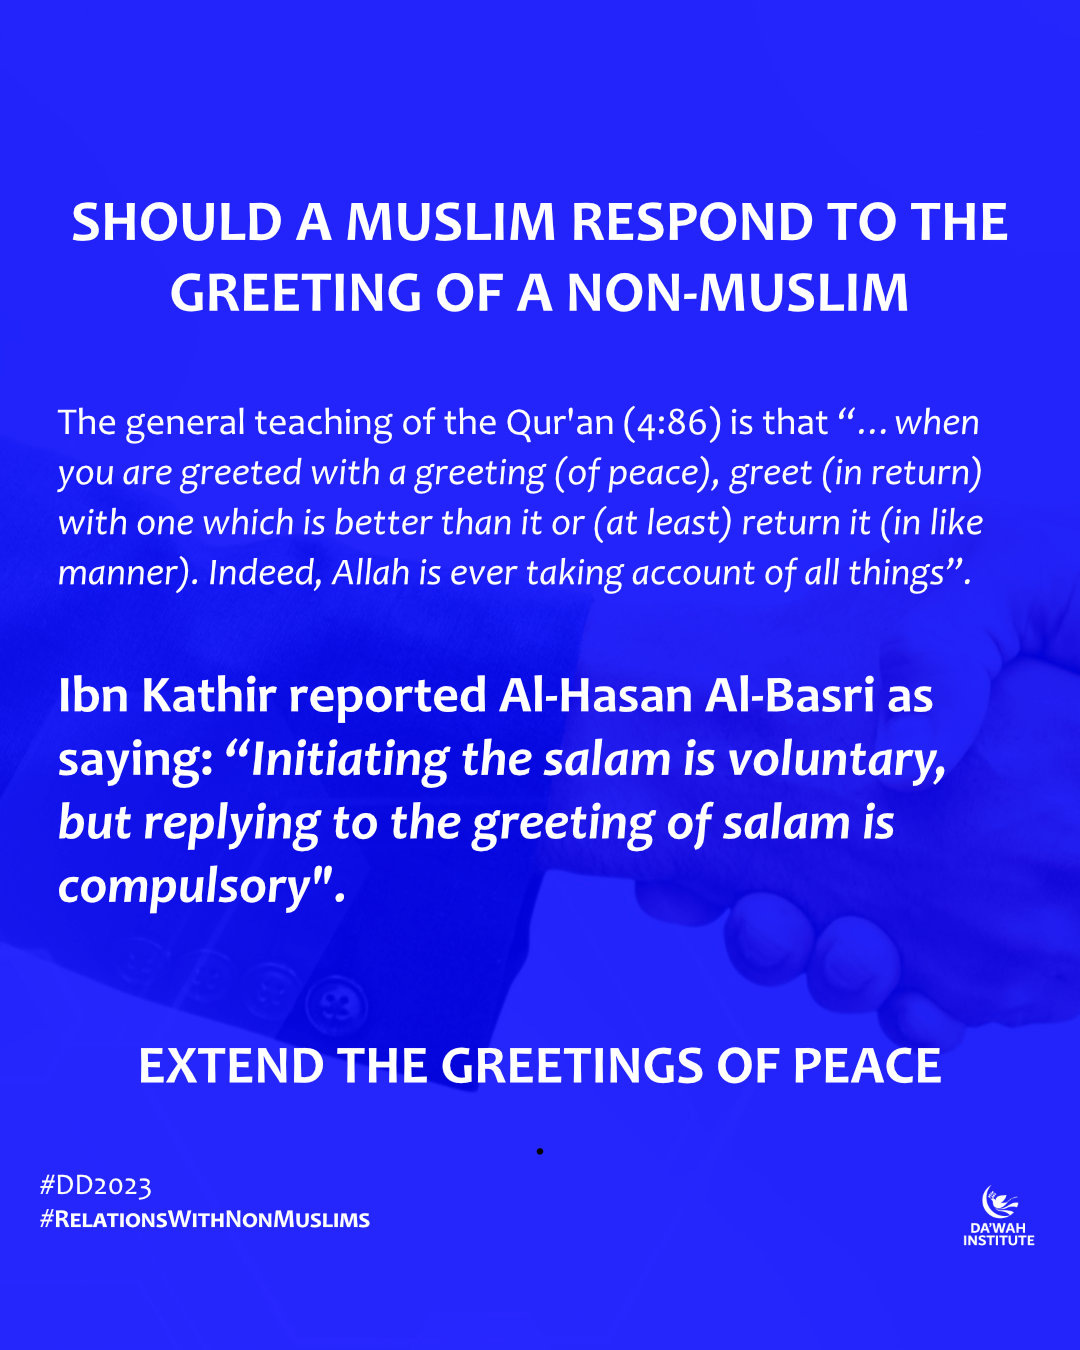 SHOULD A MUSLIM RESPOND TO THE GREETING OF A NON-MUSLIM